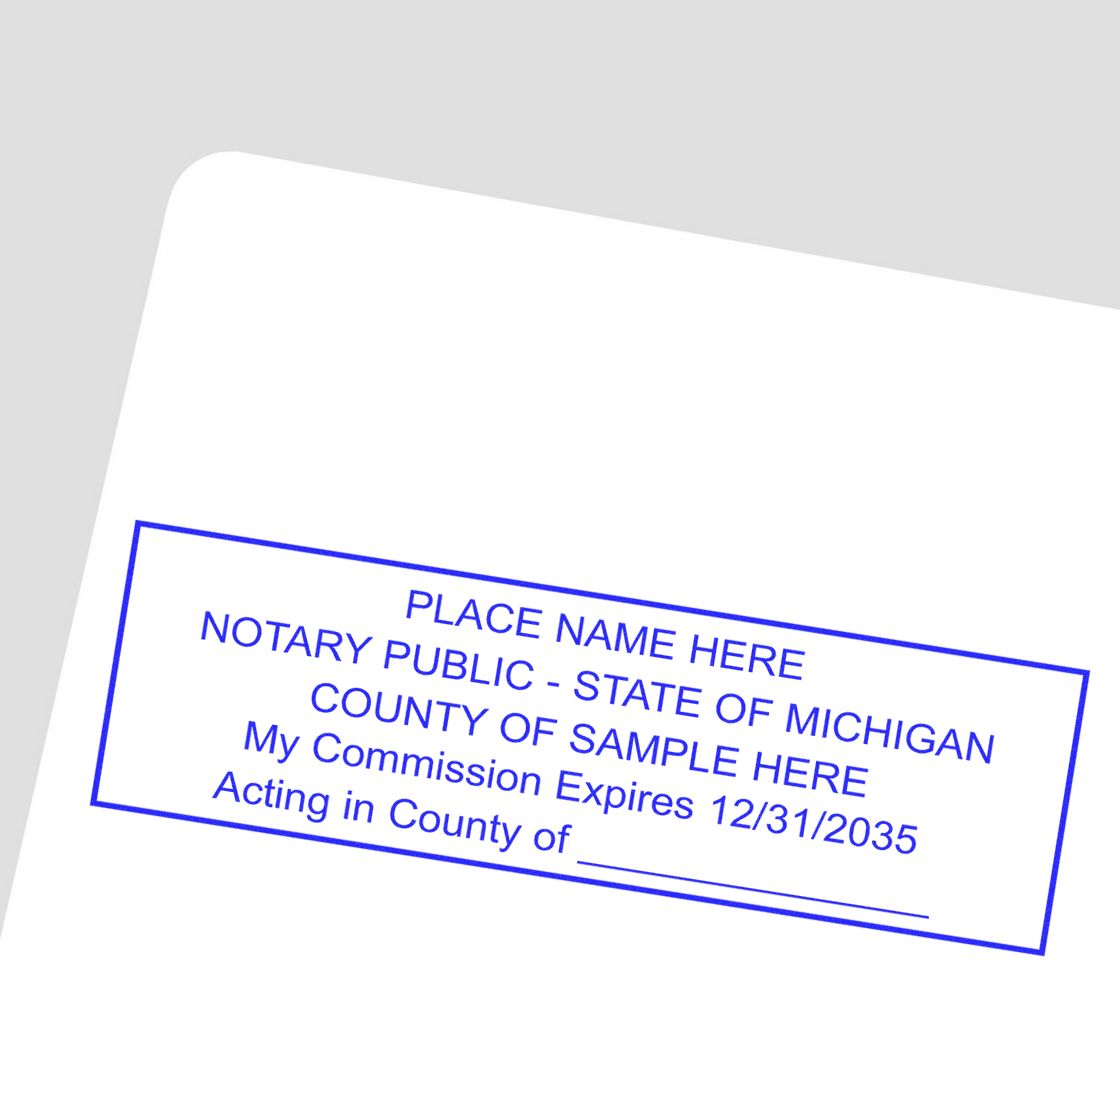 This paper is stamped with a sample imprint of the Wooden Handle Michigan State Seal Notary Public Stamp, signifying its quality and reliability.